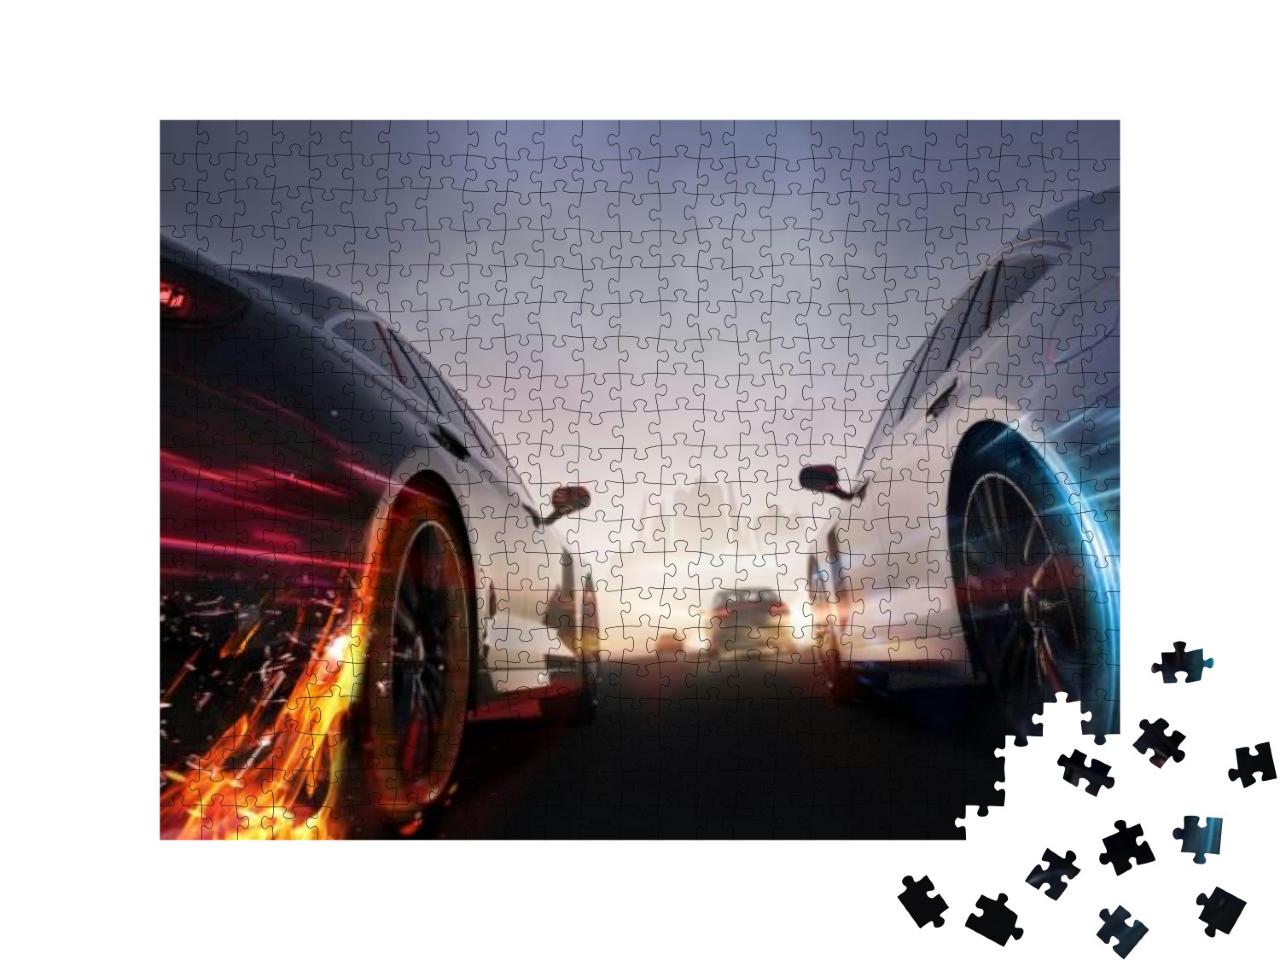 Head to Head Car Racing, Moving Towards City - Street Rac... Jigsaw Puzzle with 500 pieces